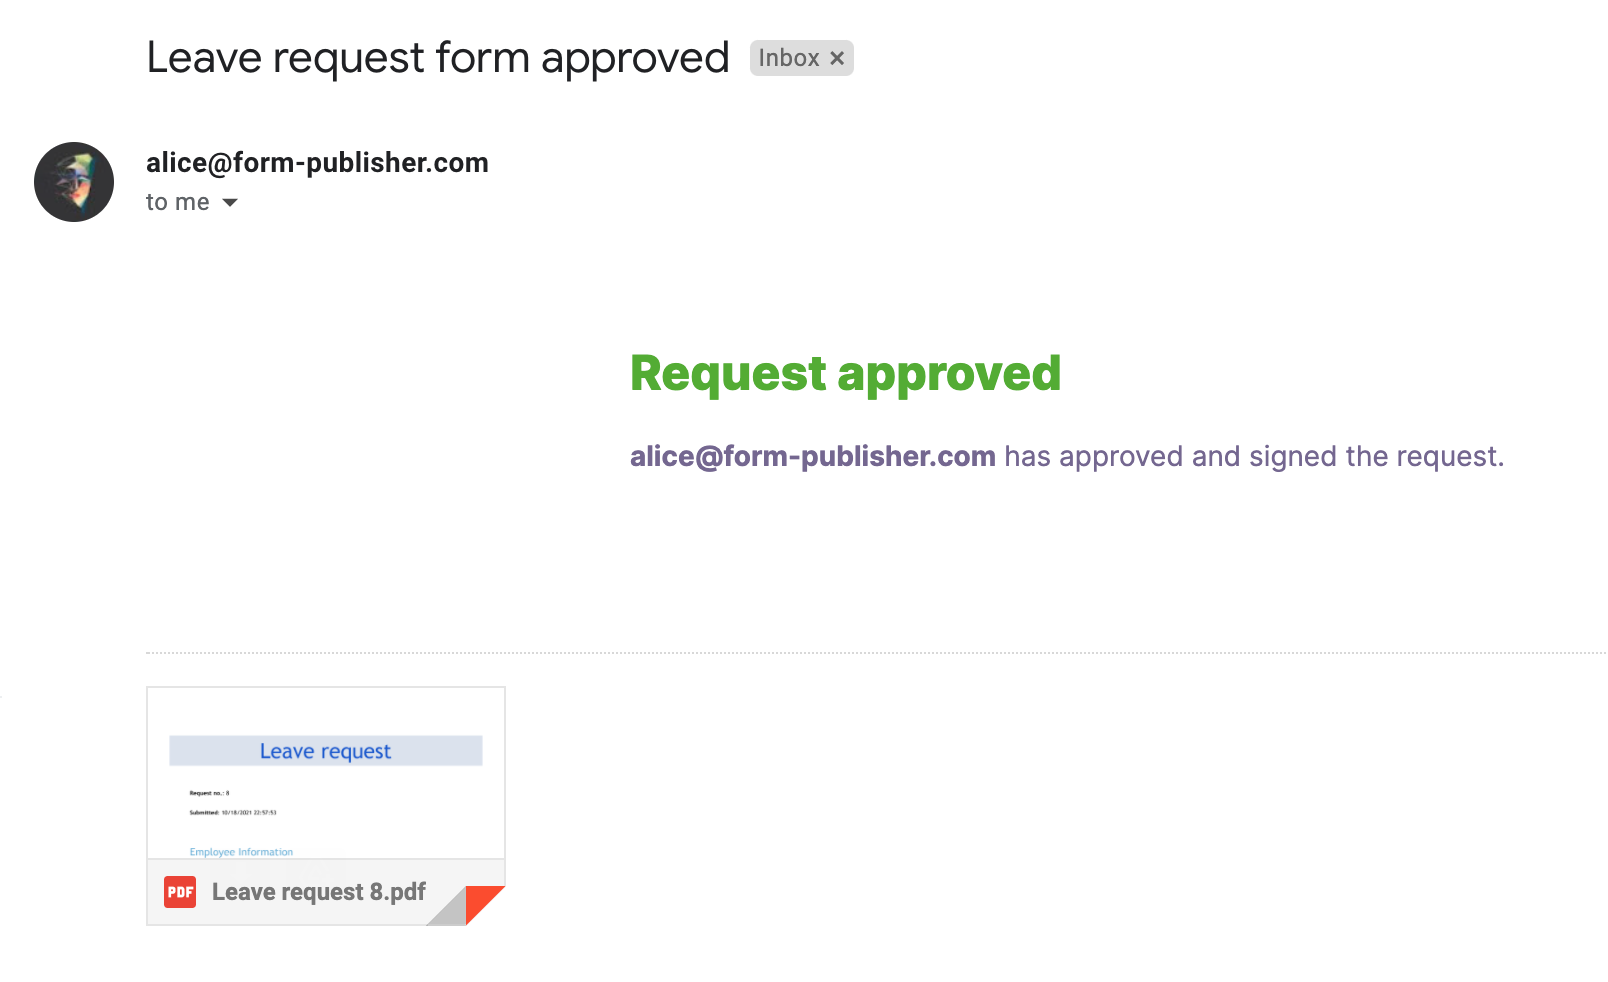 04-form-publisher-email-processed-document.png